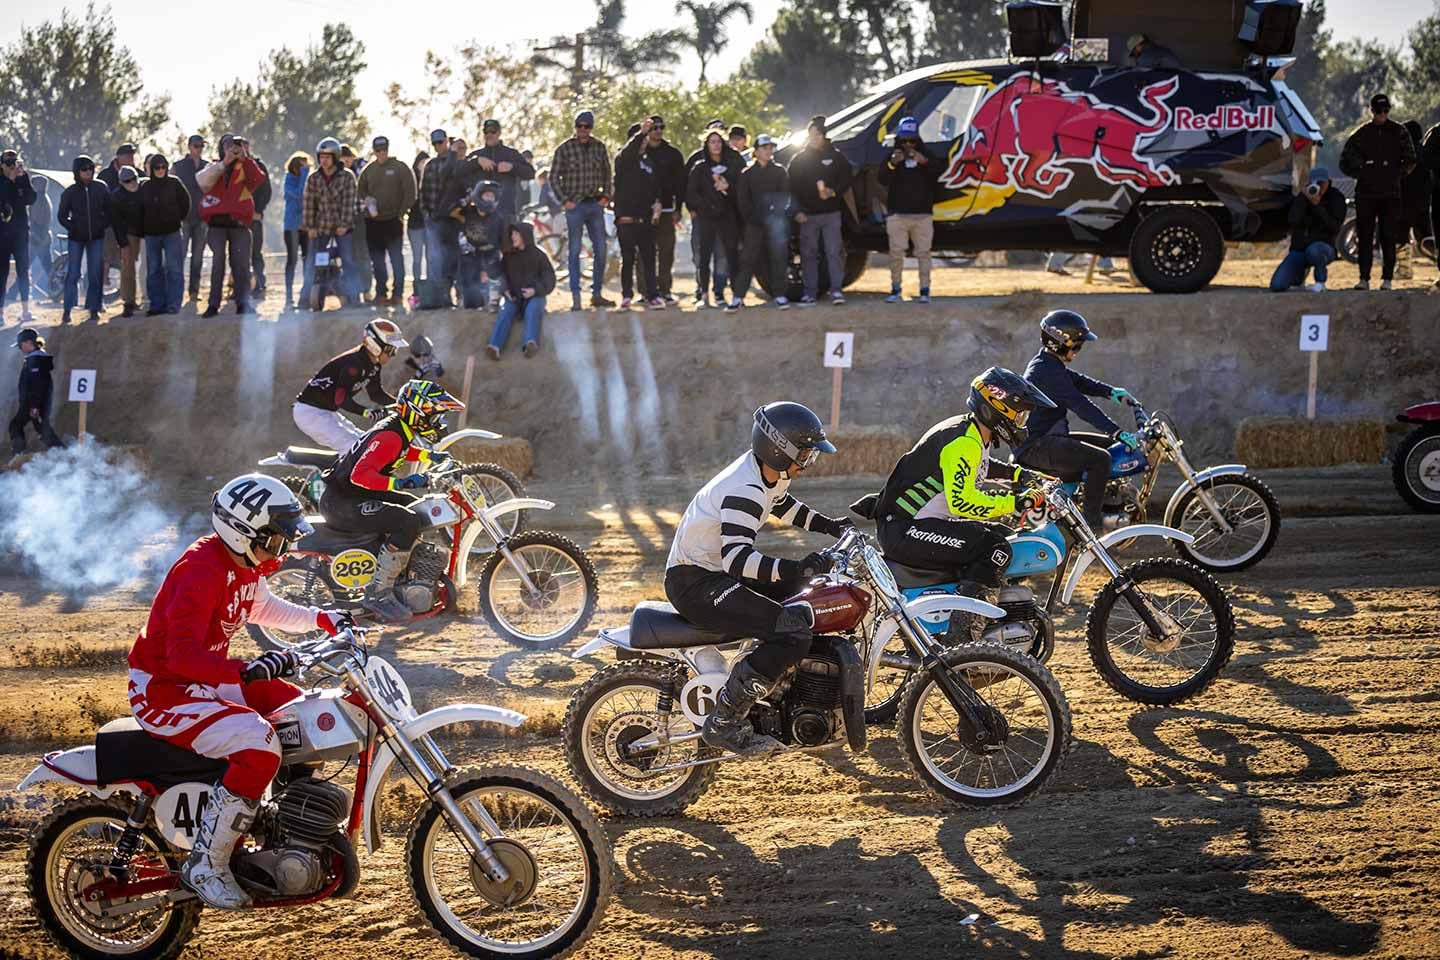 The 26th annual Red Bull Day in the Dirt took place this past Thanksgiving weekend at Glen Helen Raceway in Southern California.